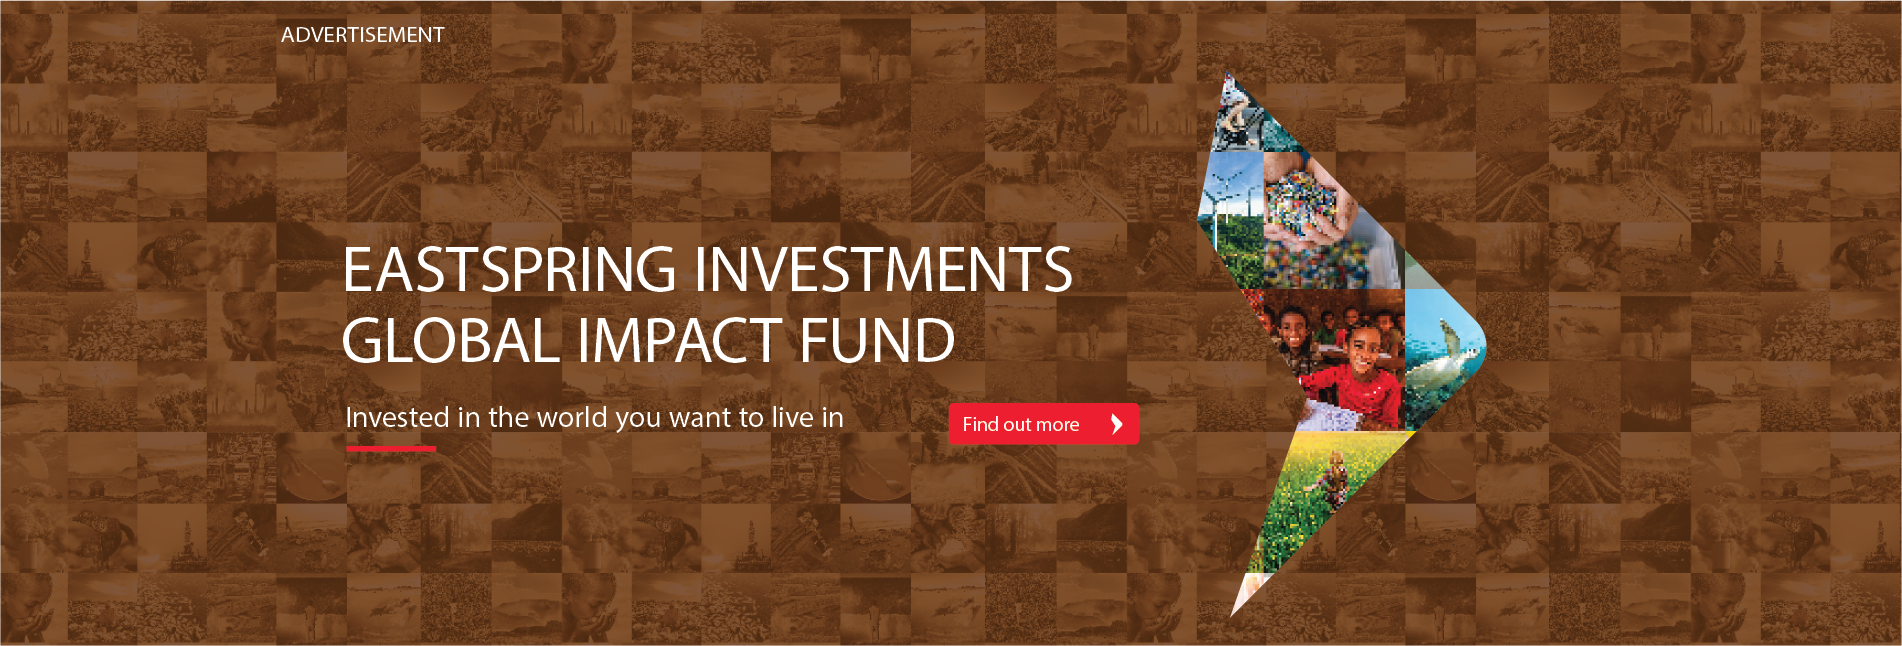 Eastspring Investments Global Impact Fund